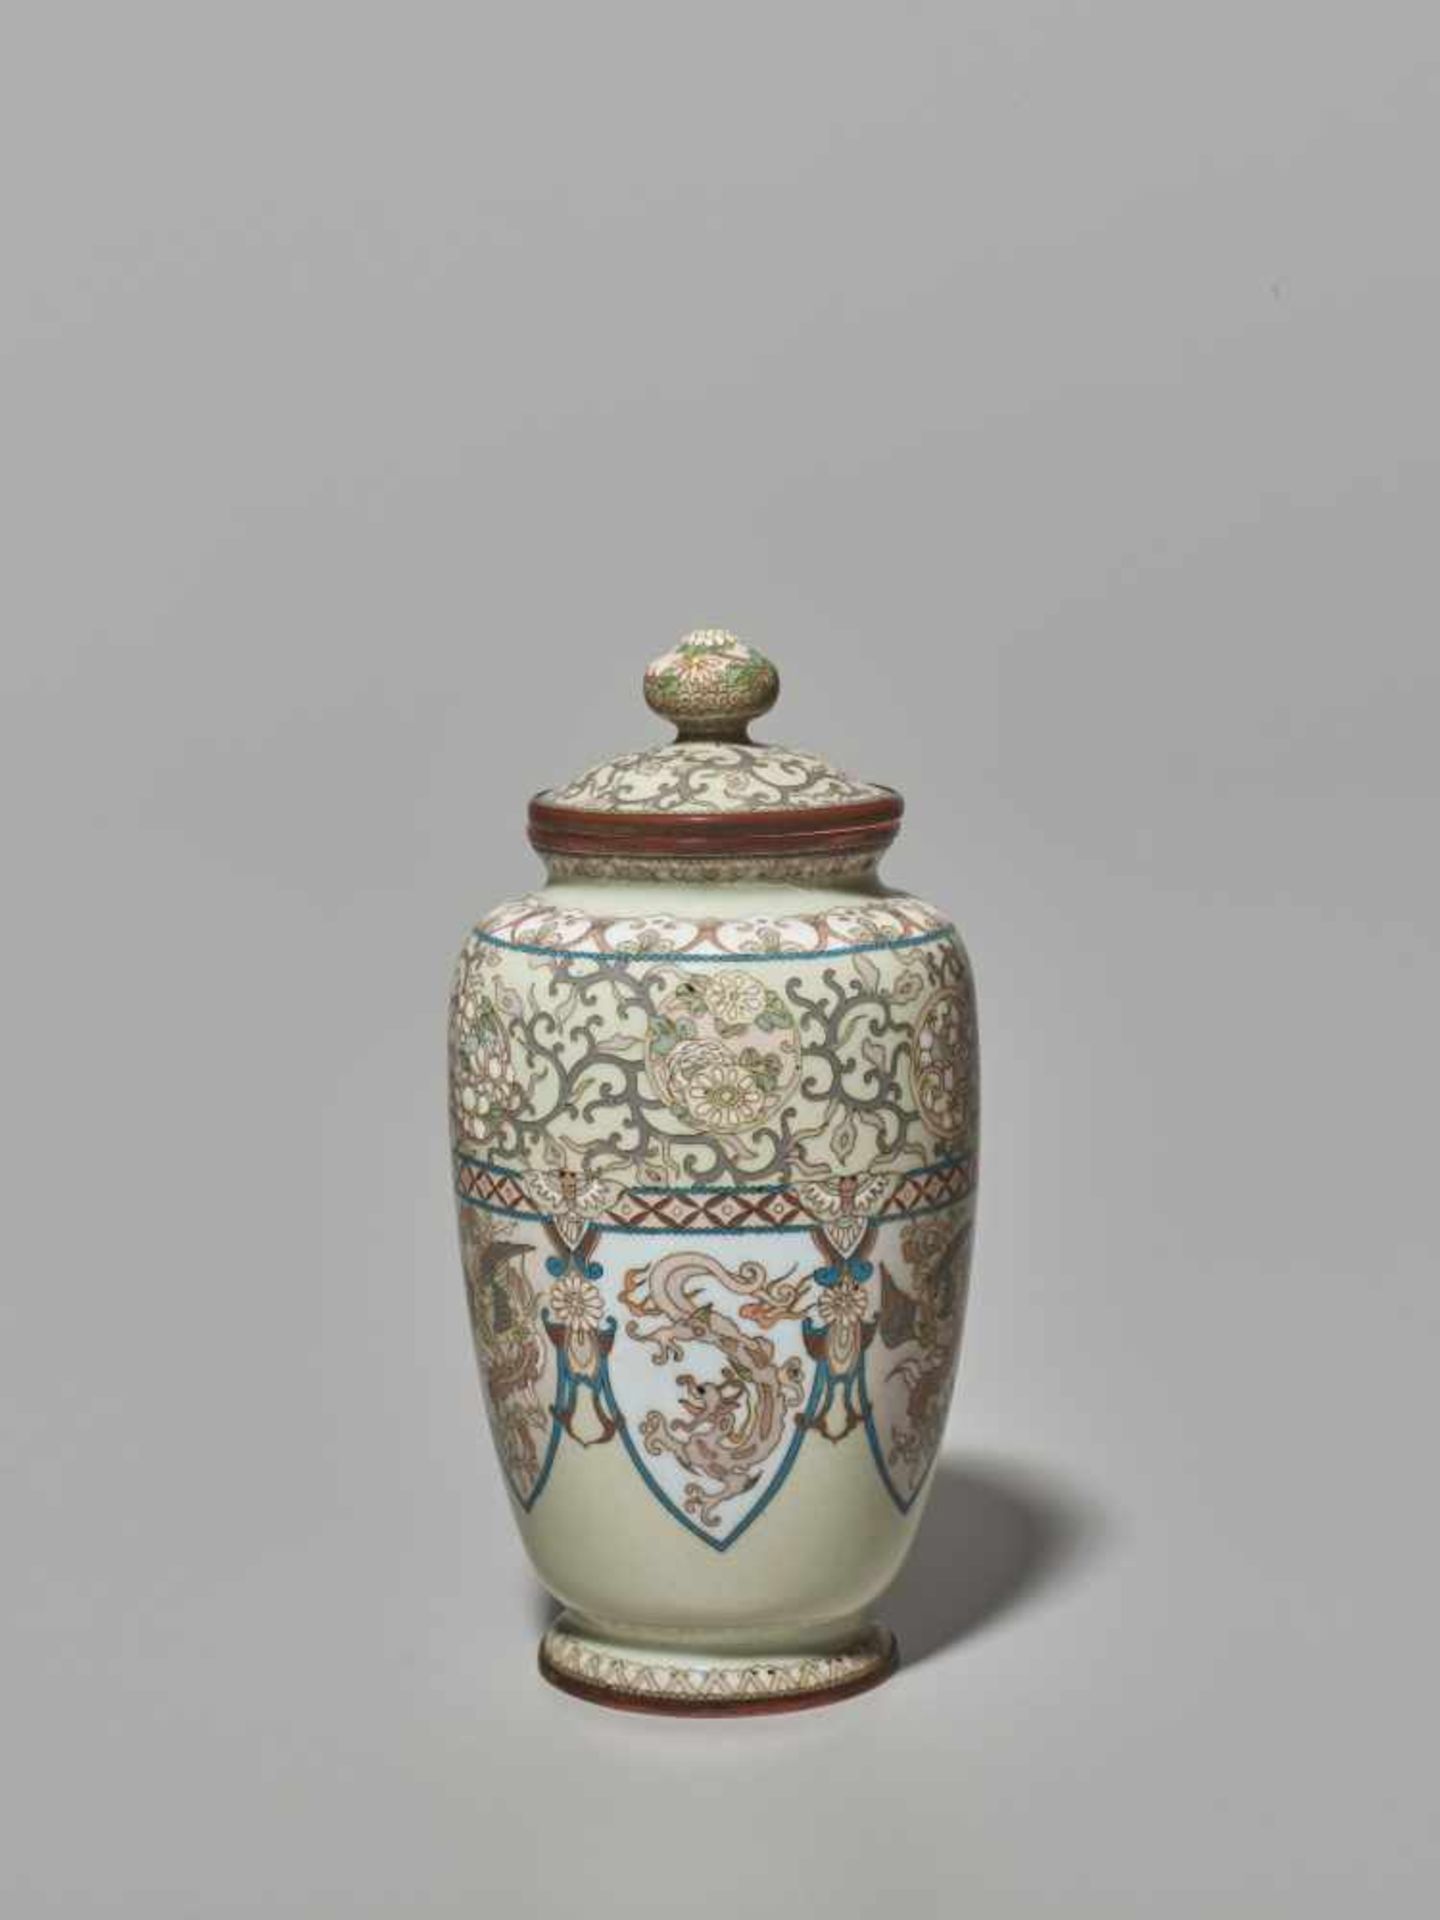 A JAPANESE CLOISONNÉ LIDDED VASE WITH A DESIGN OF PHOENIXES AND DRAGONSCloisonné with colored - Image 4 of 6